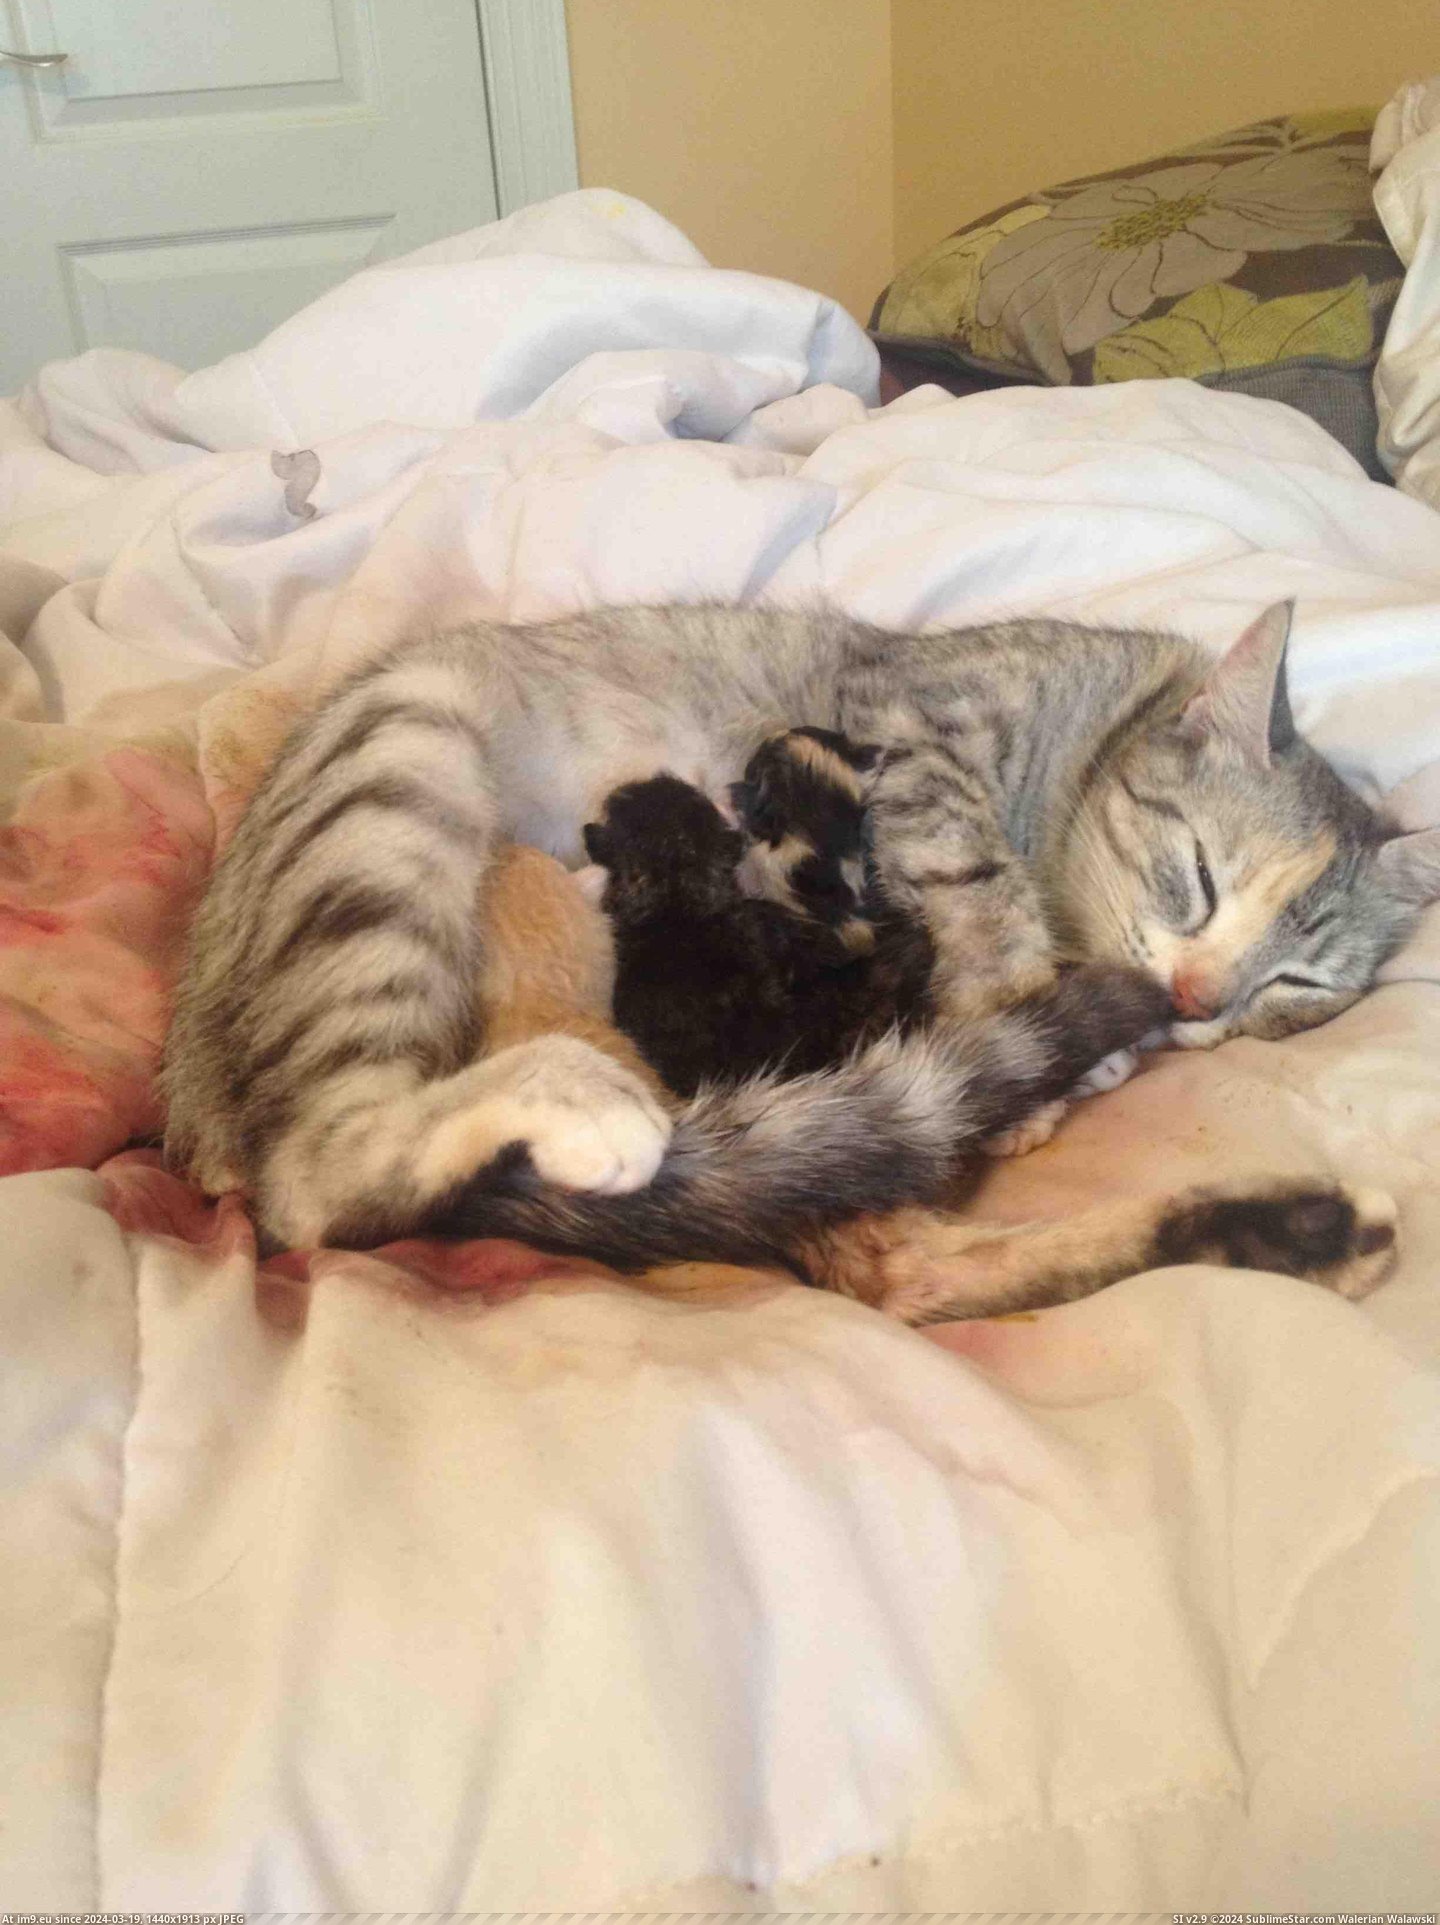 #You #Cat #Bed #She #Wake #Babies #Joking #Can #Had #Find #Guess [Aww] I've been joking that I will wake up and find my cat had her babies in bed with me. I'm sure you can guess where she had h Pic. (Image of album My r/AWW favs))